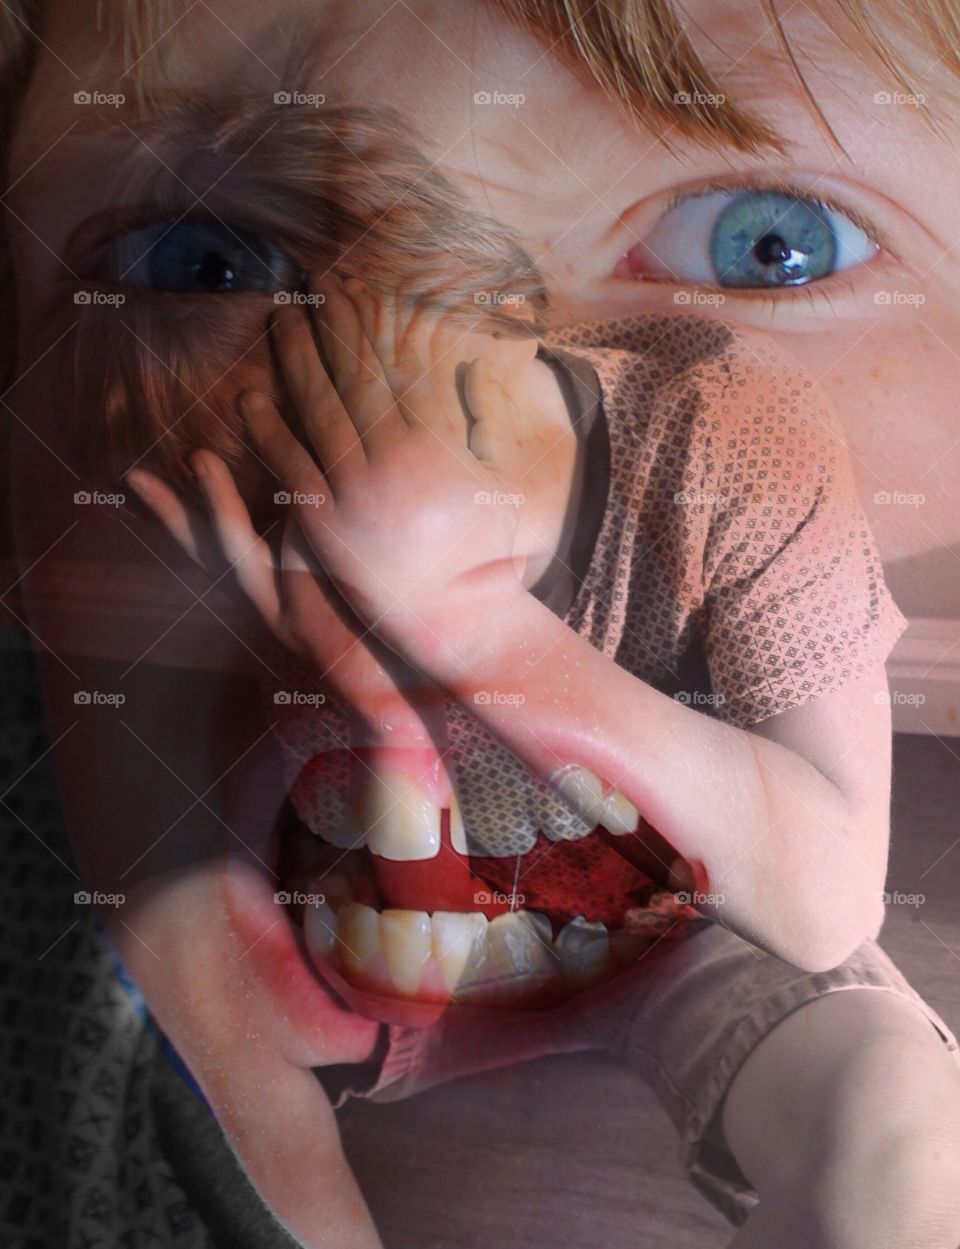 Distraught child. Child crying on the floor with a double exposure image overlaid of the same child screaming 